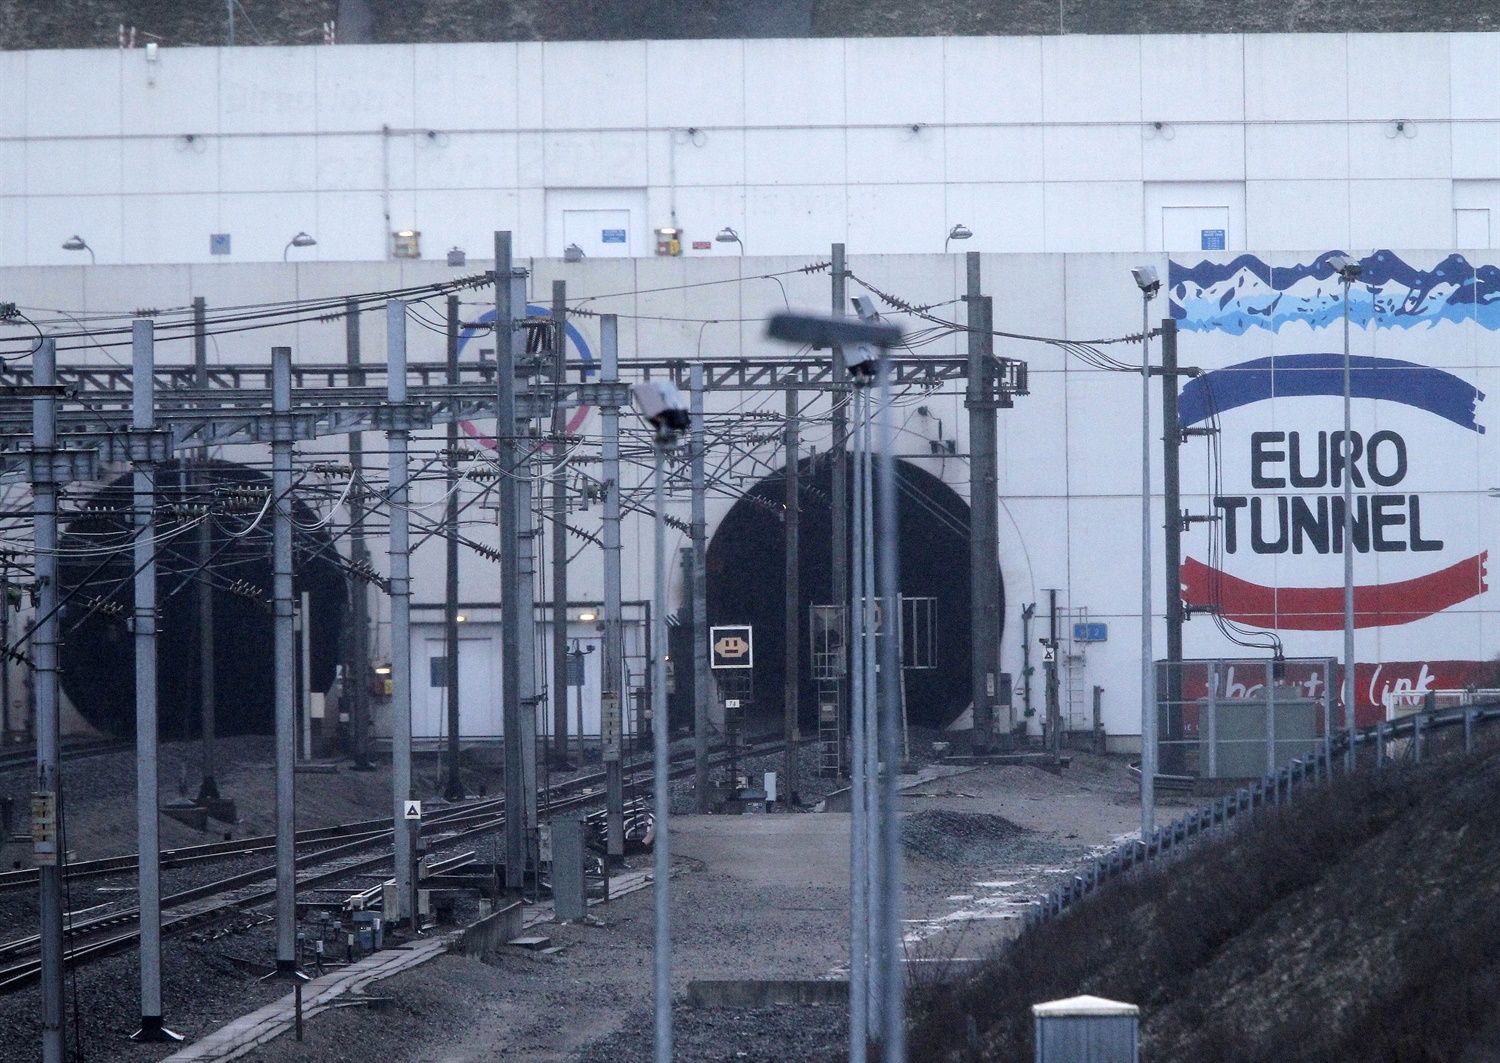 RAIB to work with French authorities to investigate Eurotunnel fire